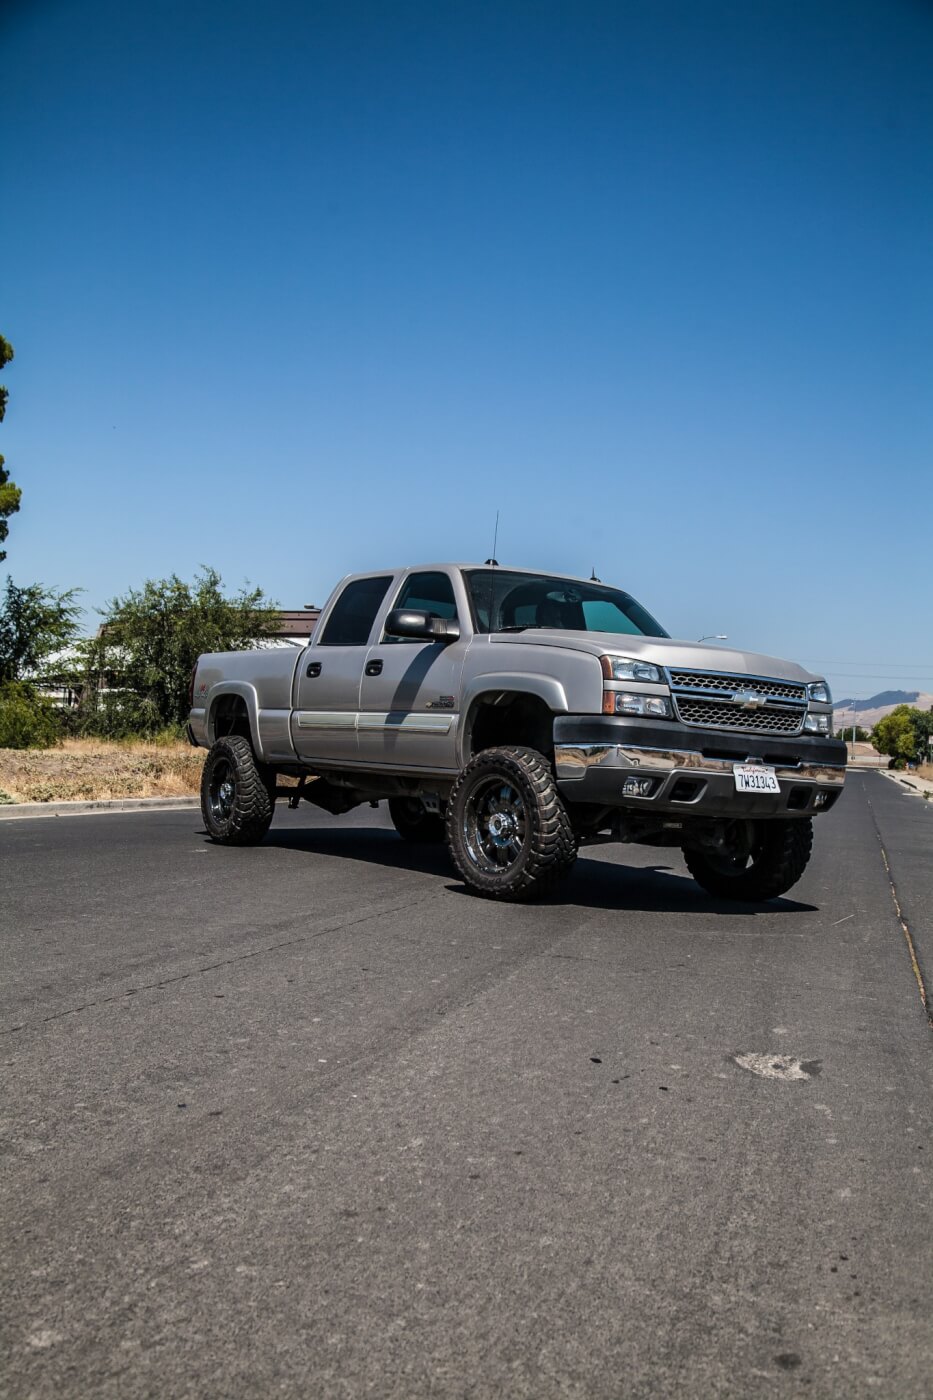 Matt Kutchera’s LLY-equipped 2005 Silverado 2500 LTZ is fully loaded, has ridiculously low mileage and is as clean as they come. Prior to our PPE fuel upgrades, the rig had full exhaust, a cold air intake and a combination of PPE and Edge tuning products.